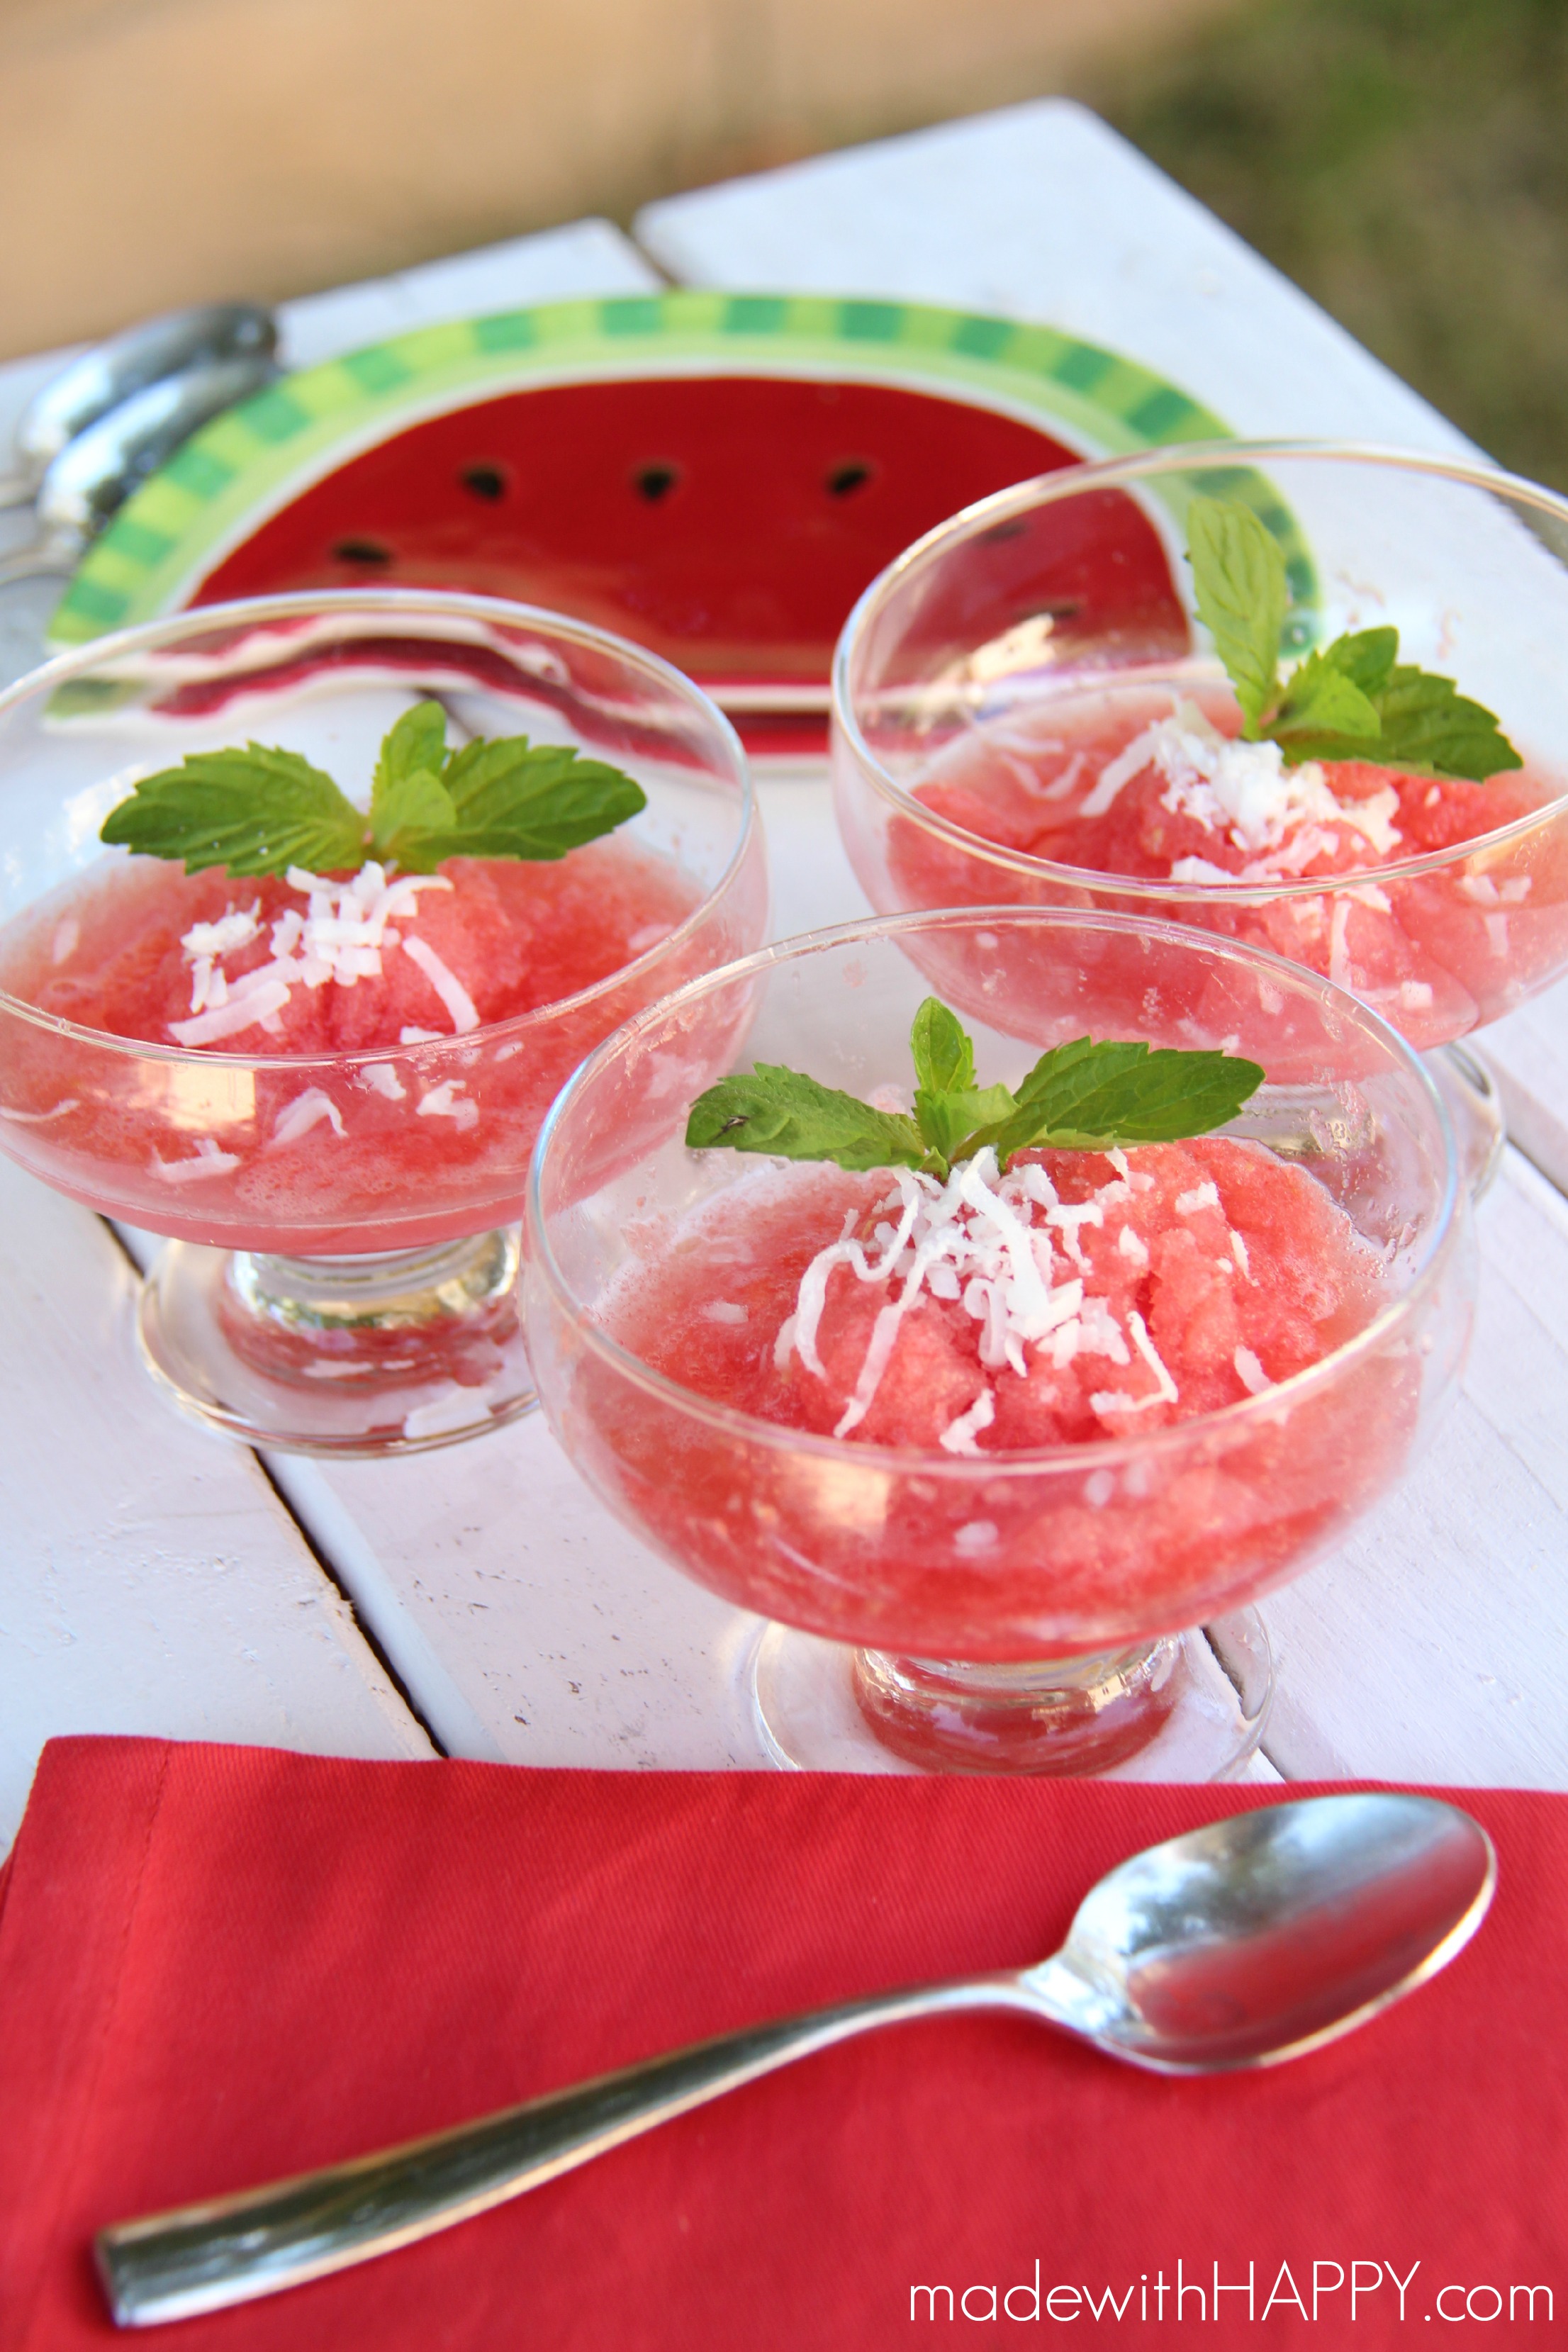 Boozy Watermelon Sorbet - a delicious combination of homemade watermelon sorbet and coconut rum. So refreshing!